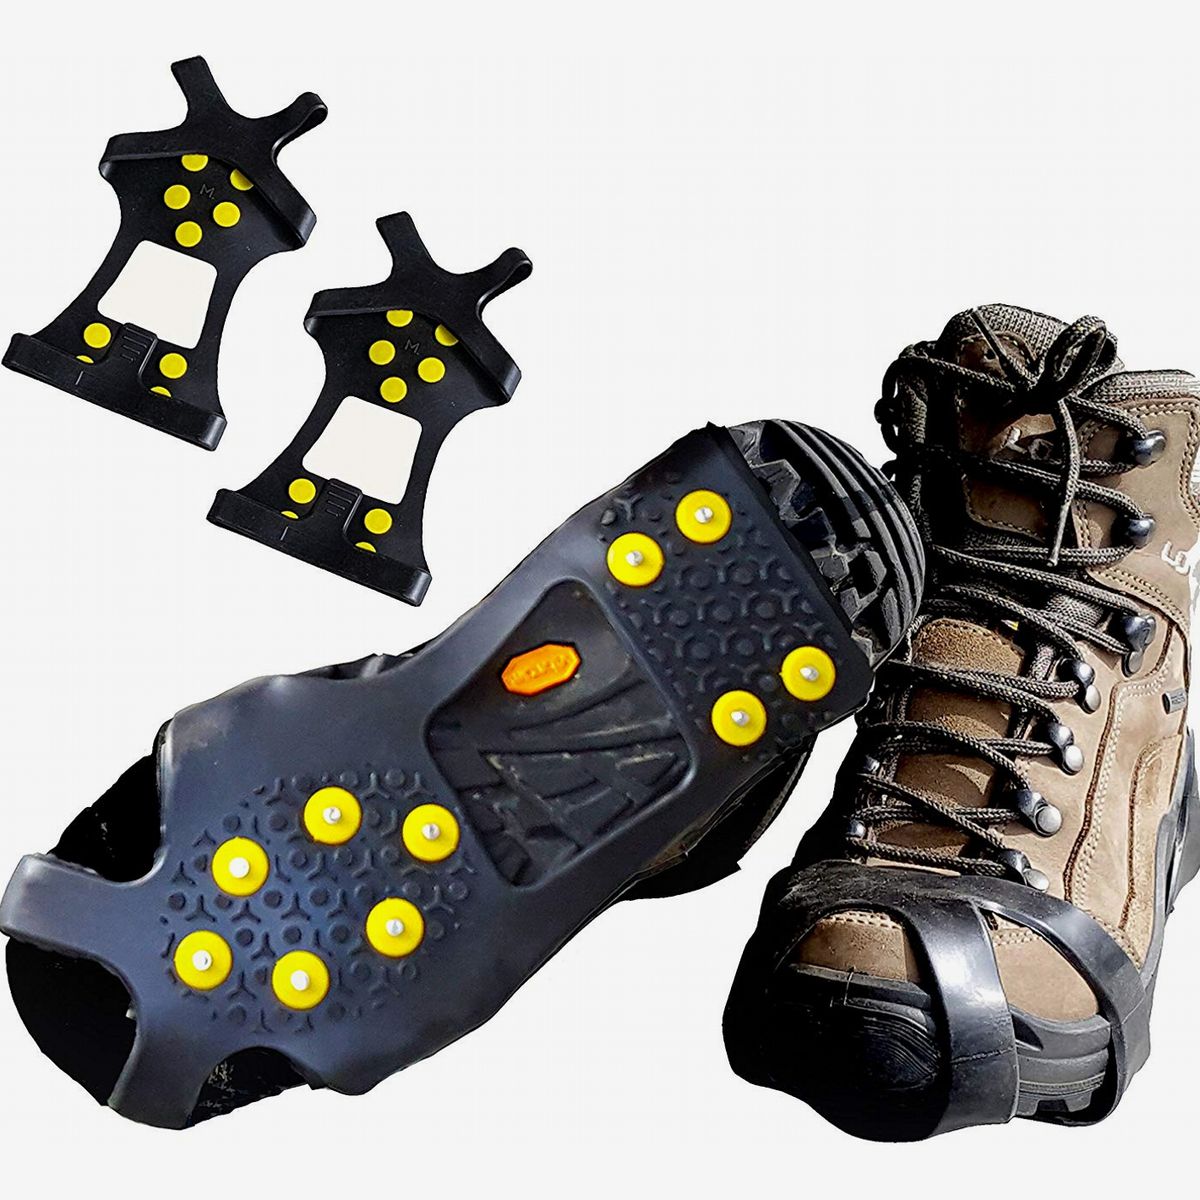 Anti-Slip ​24 Studs Spikes Grip Ice Snow Traction Cleats Crampons Elastic Winter Snow Grippers Boots Shoes Cover for Jogging Hiking and Walking on Snow and Ice Houseen Ice Grips 